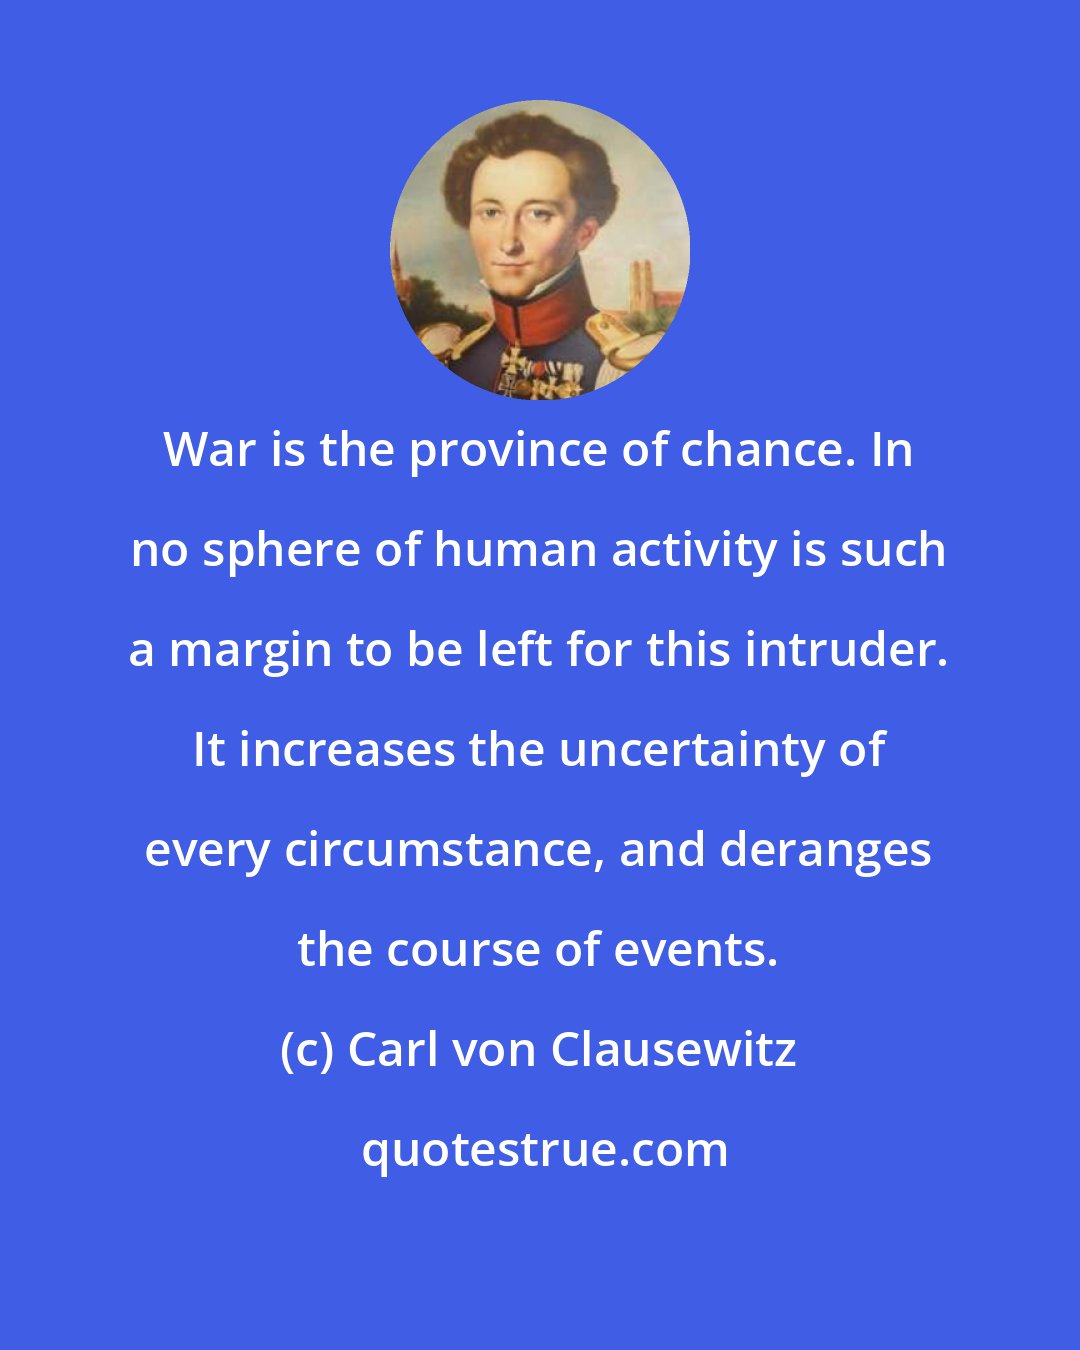 Carl von Clausewitz: War is the province of chance. In no sphere of human activity is such a margin to be left for this intruder. It increases the uncertainty of every circumstance, and deranges the course of events.